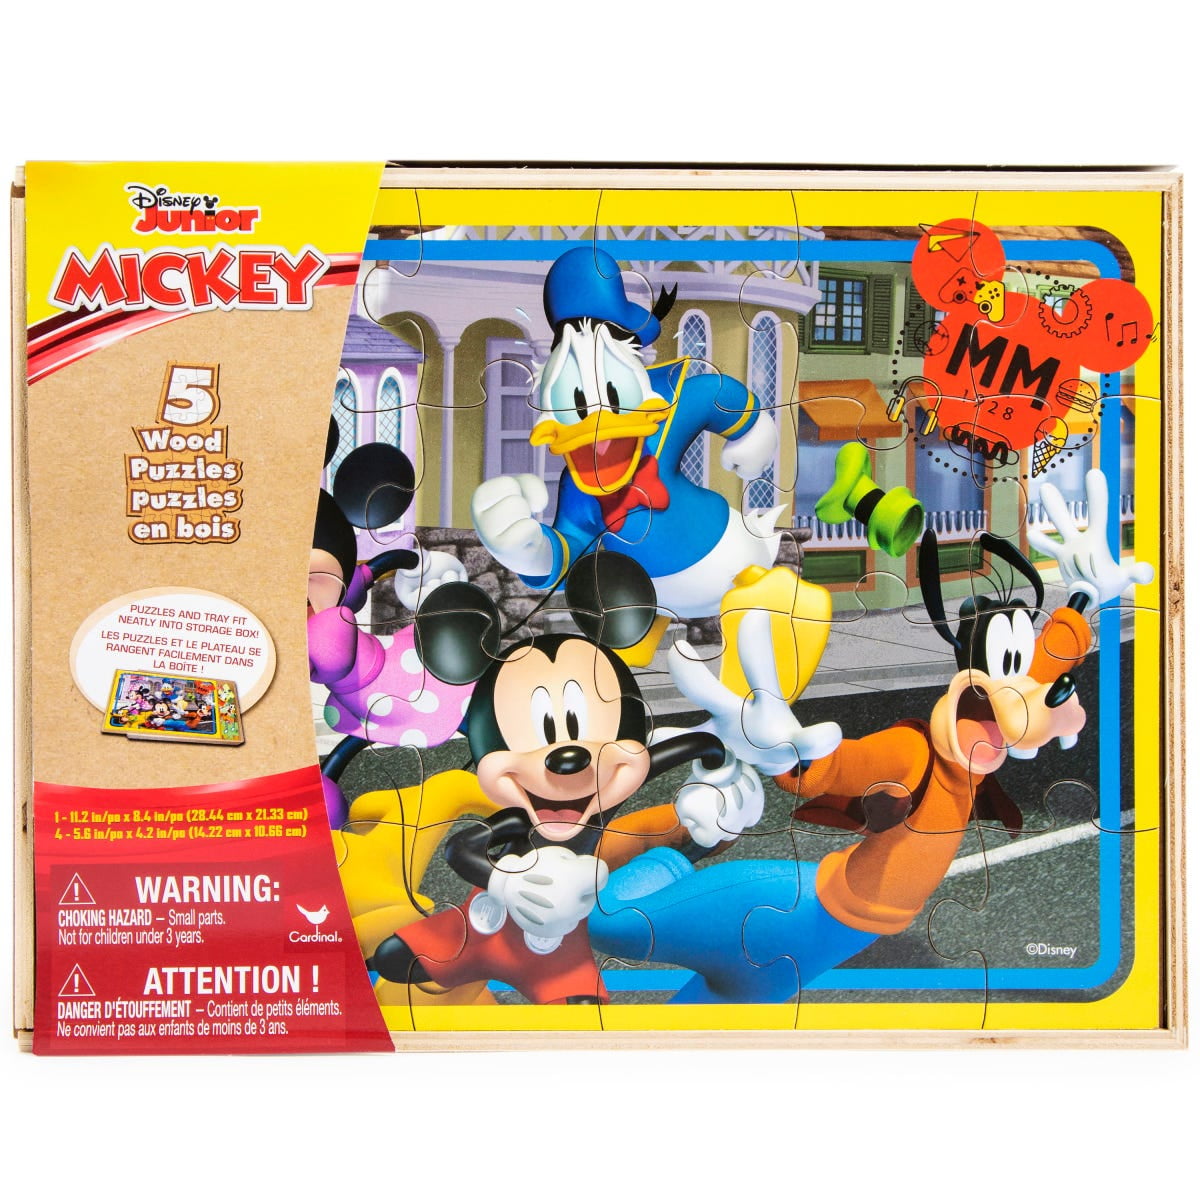 DISNEY Mickey Mouse 5 pack Wood Puzzles Storage Box Educational Puzzle NEW 